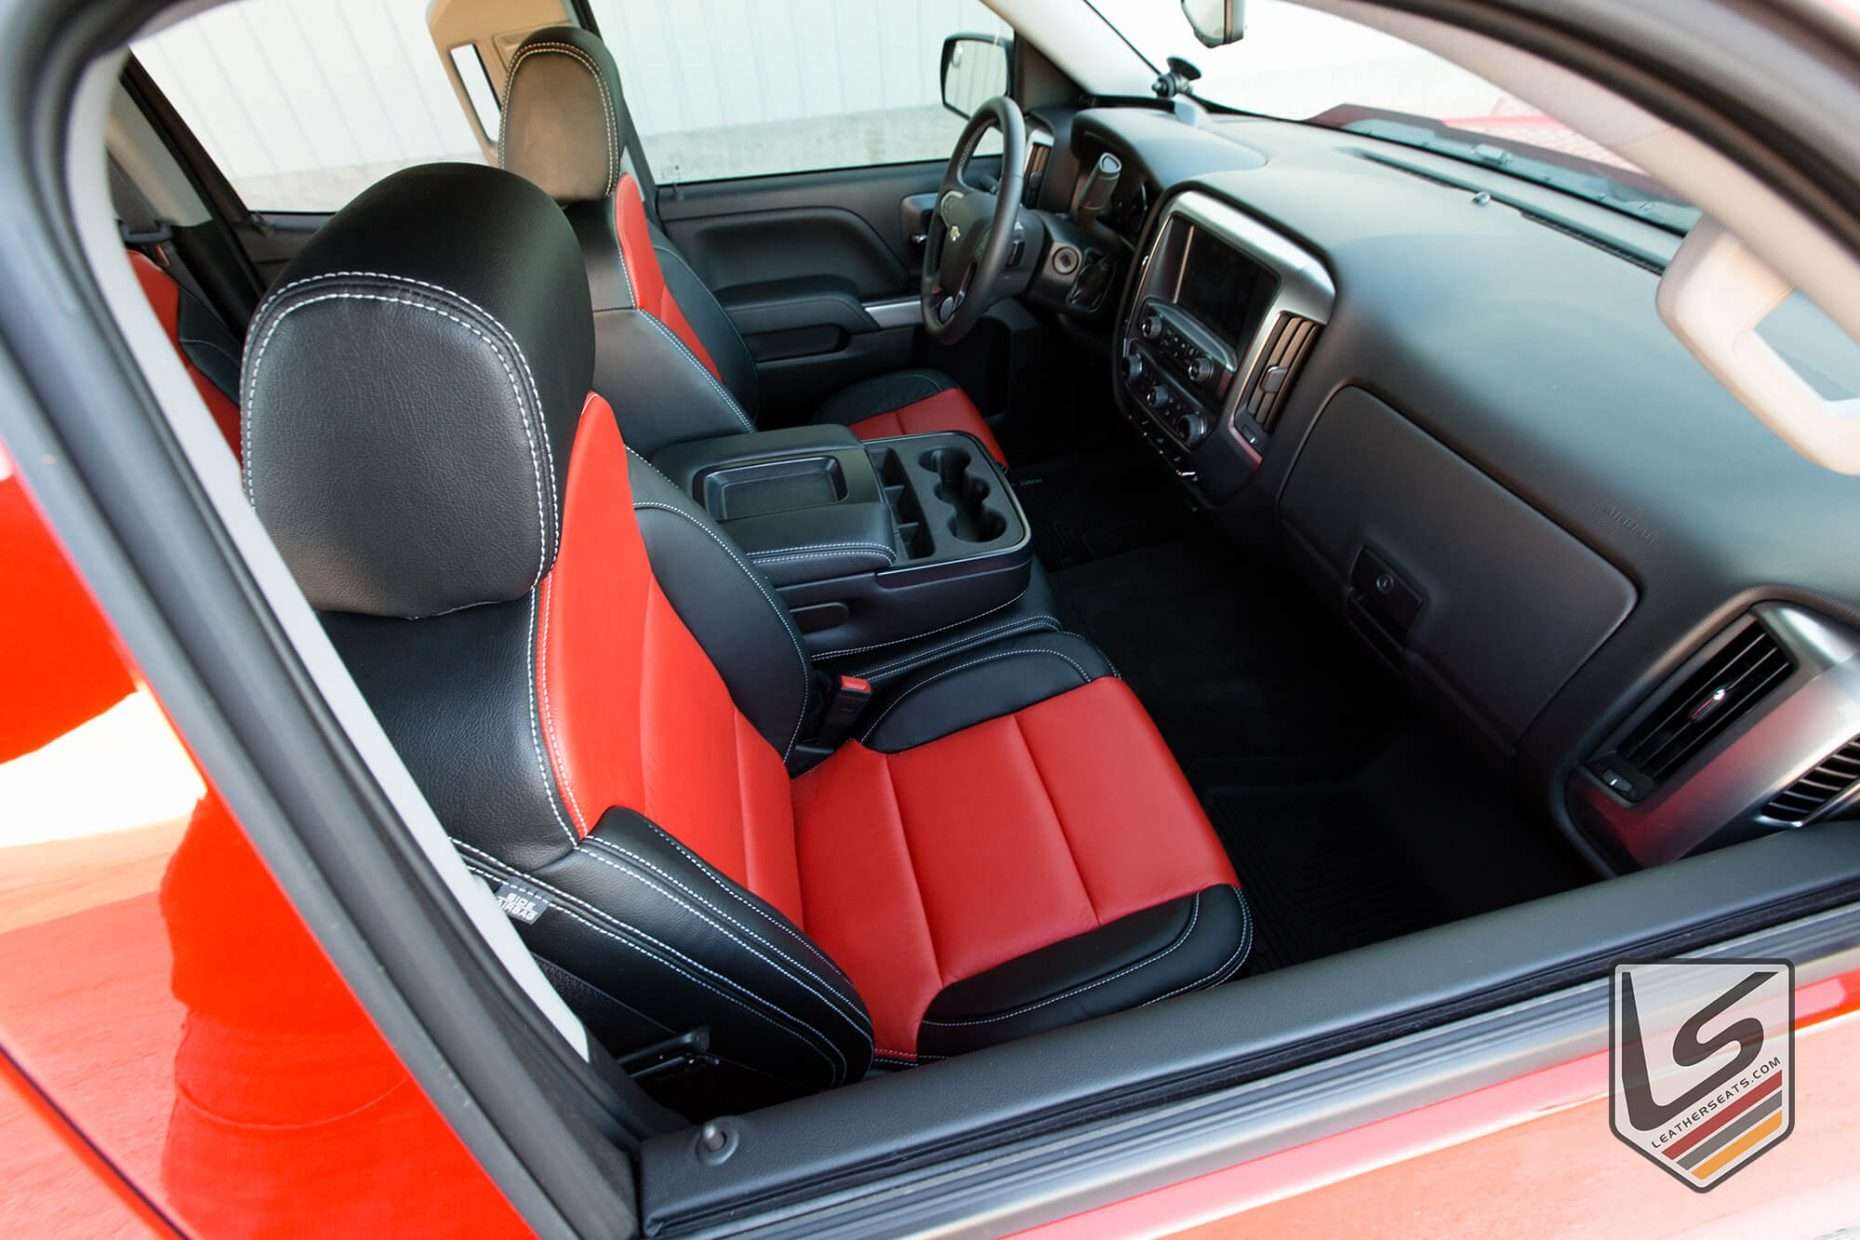 Top-down view of full Silverado passenger seat in Black and Bright Red leather with contrasting stitching